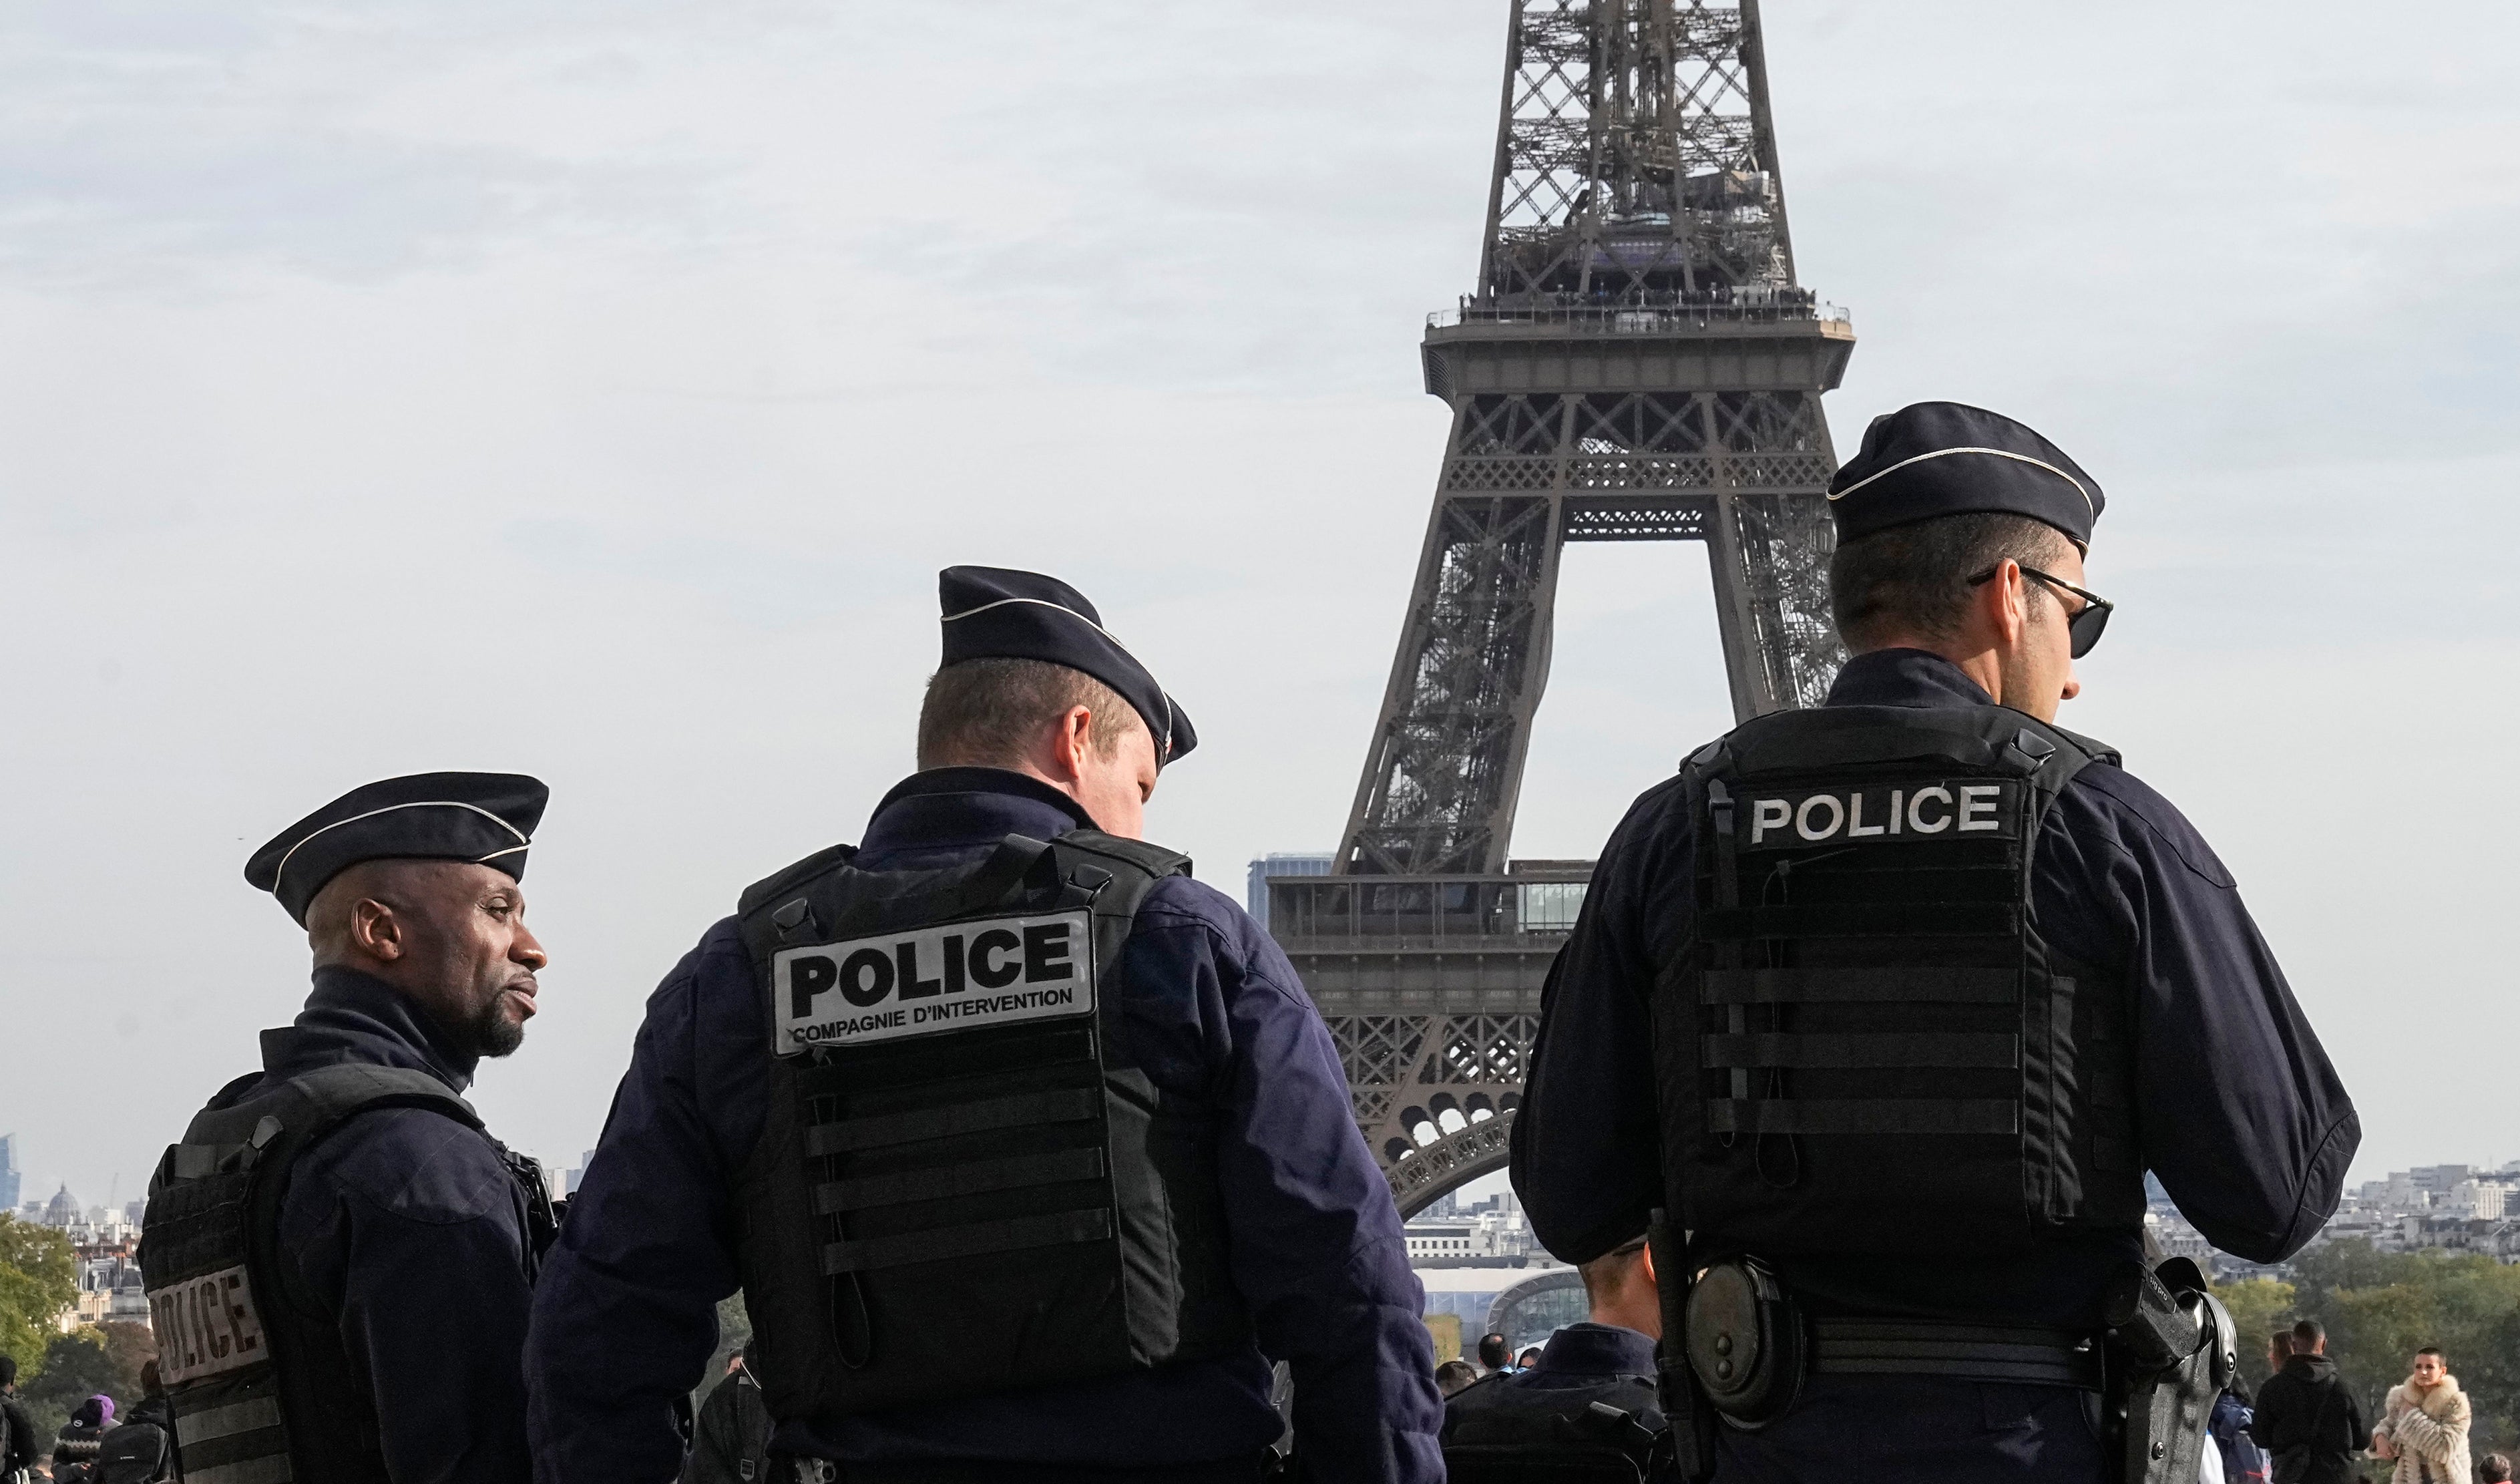 Police officers patrol the Trocadero plaza near the Eiffel Tower in Paris